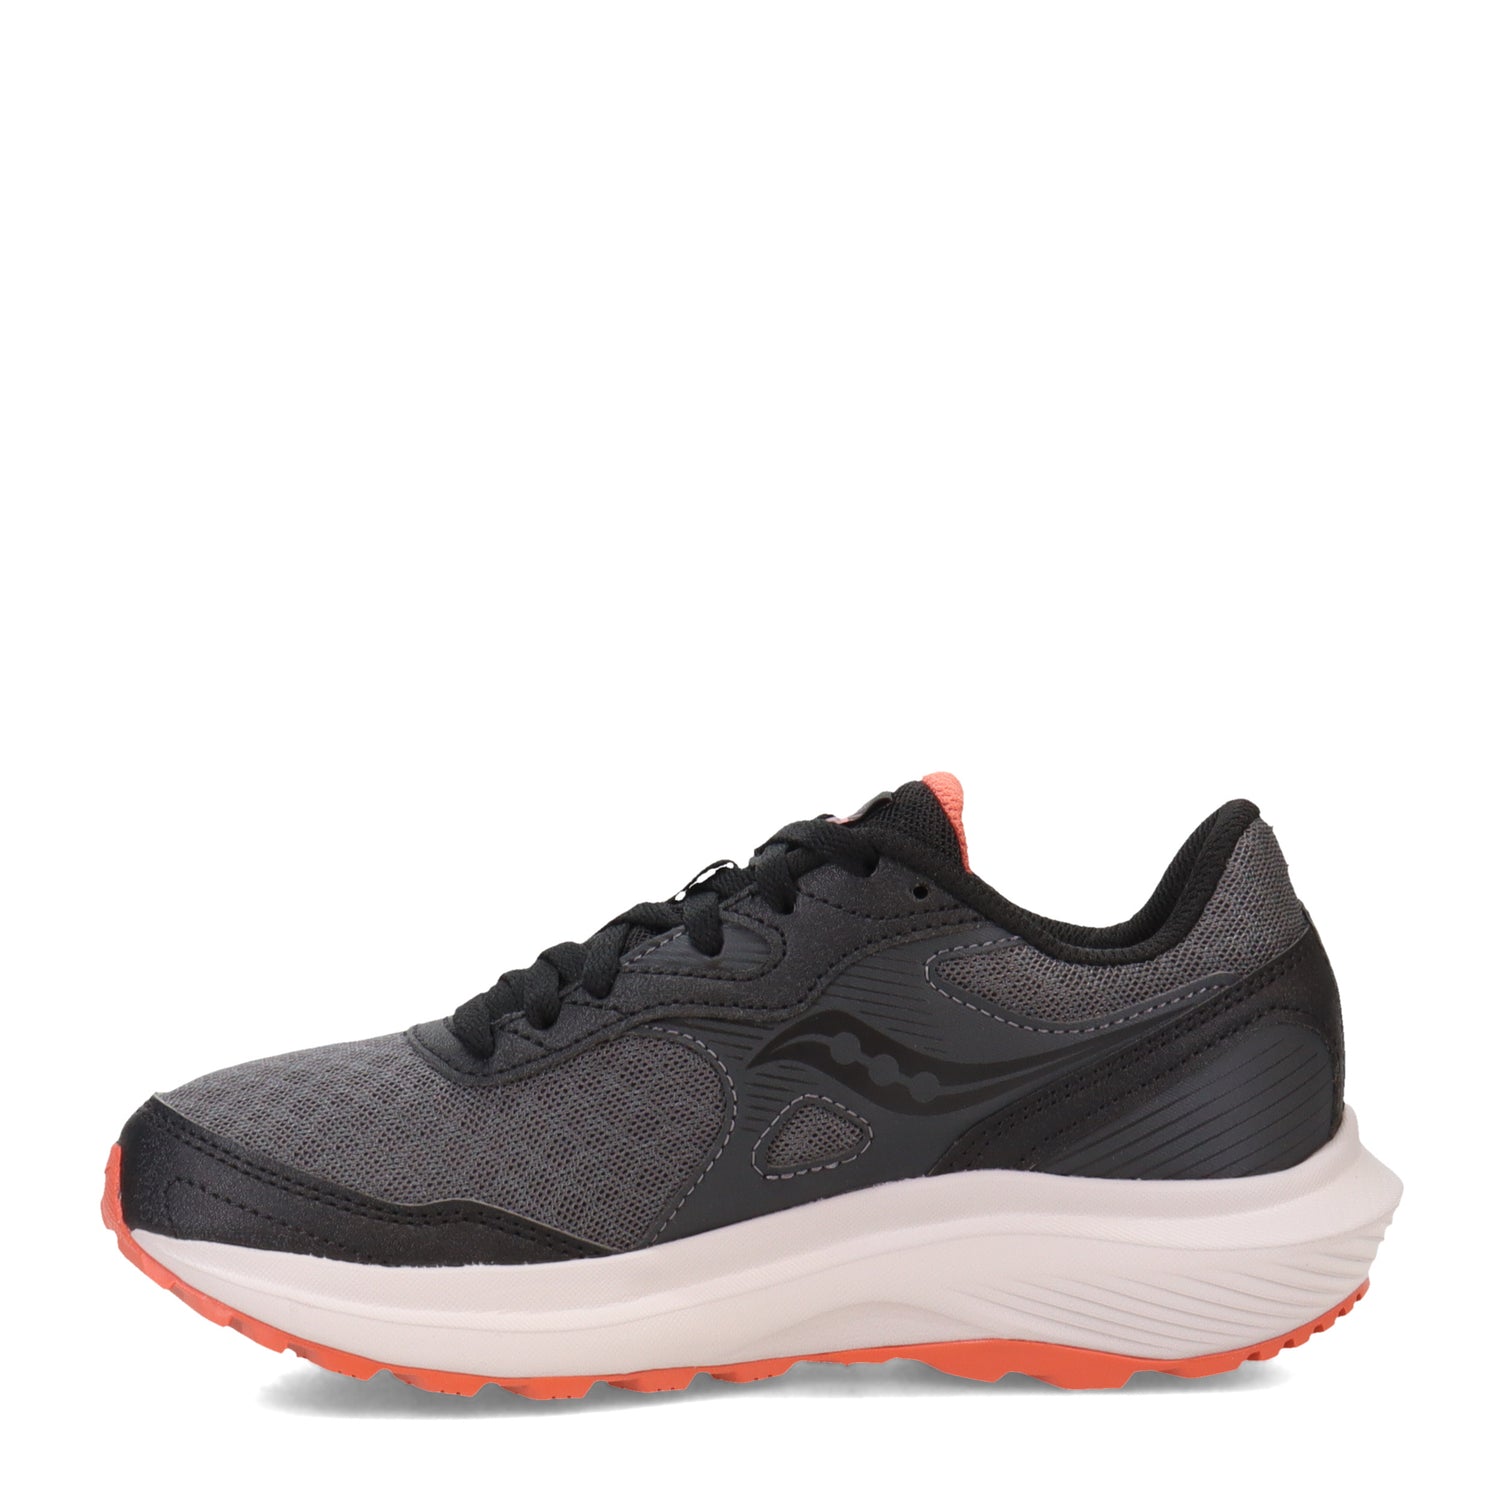 Peltz Shoes  Women's Saucony Cohesion TR16 Running Shoe - Wide Width Shadow/Ember S10787-10